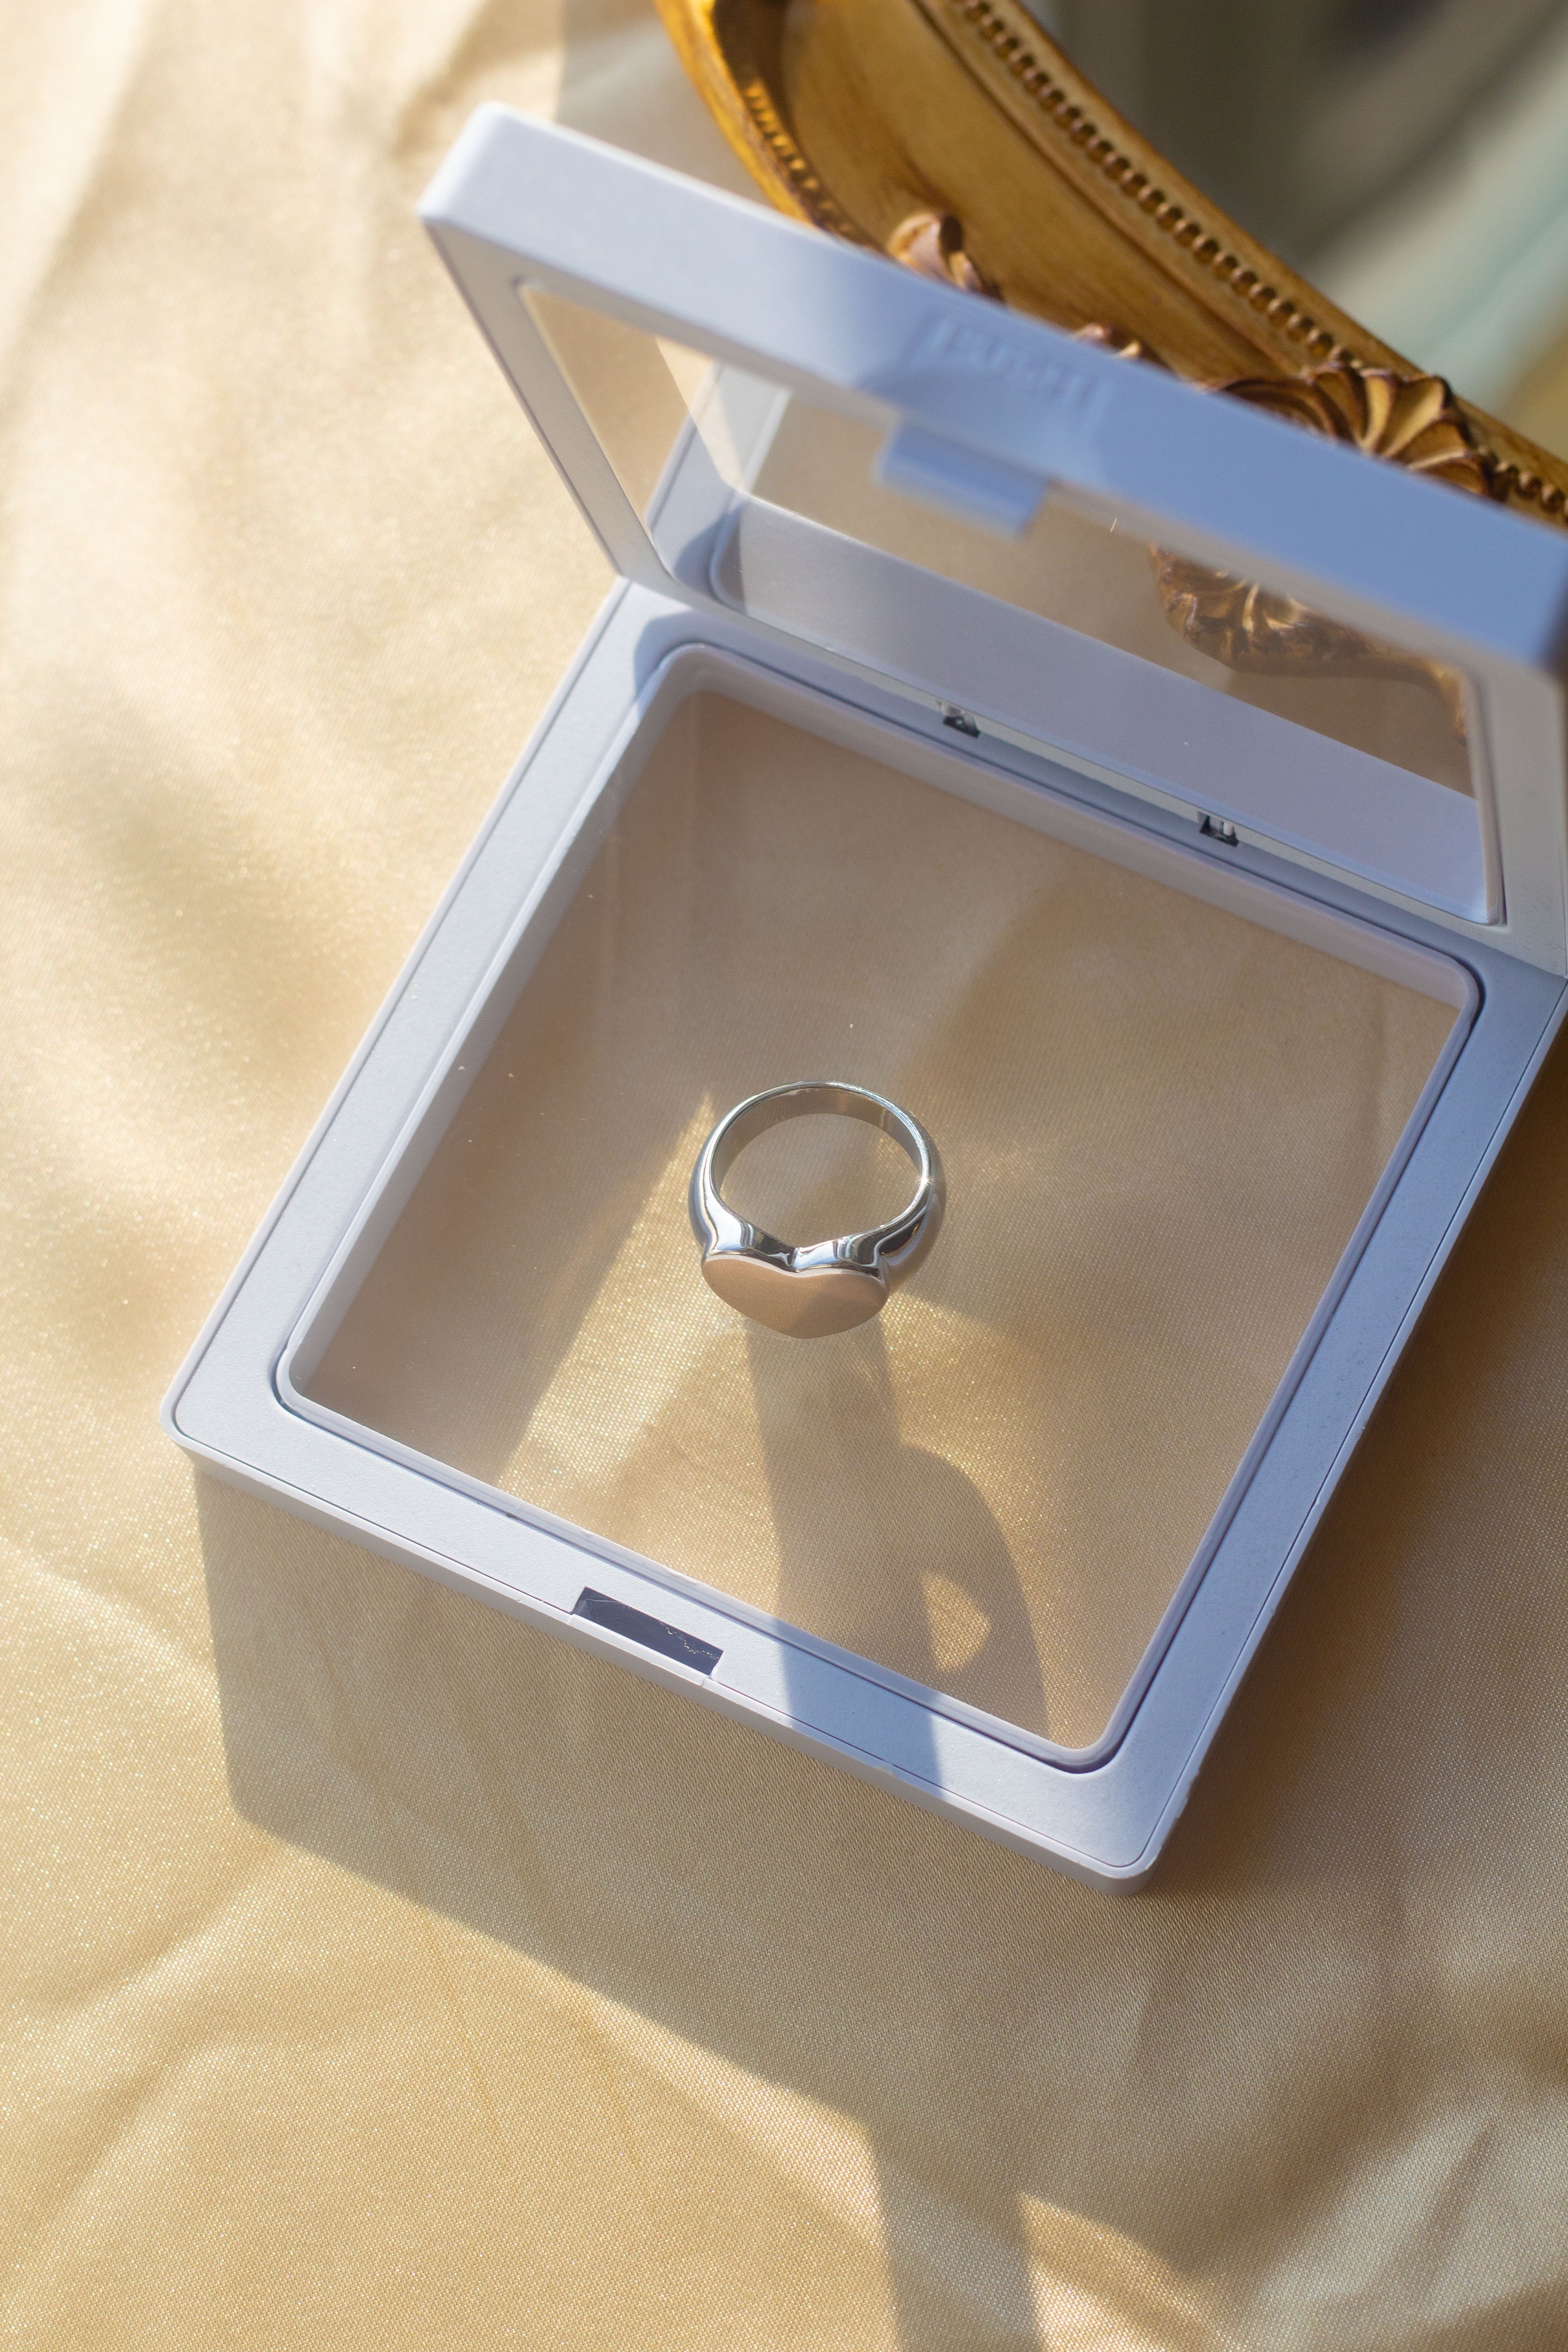 18k silver signet ring resting in a white container on a table with a beige cloth. Ellina Heart Signet Ring by E's Element.